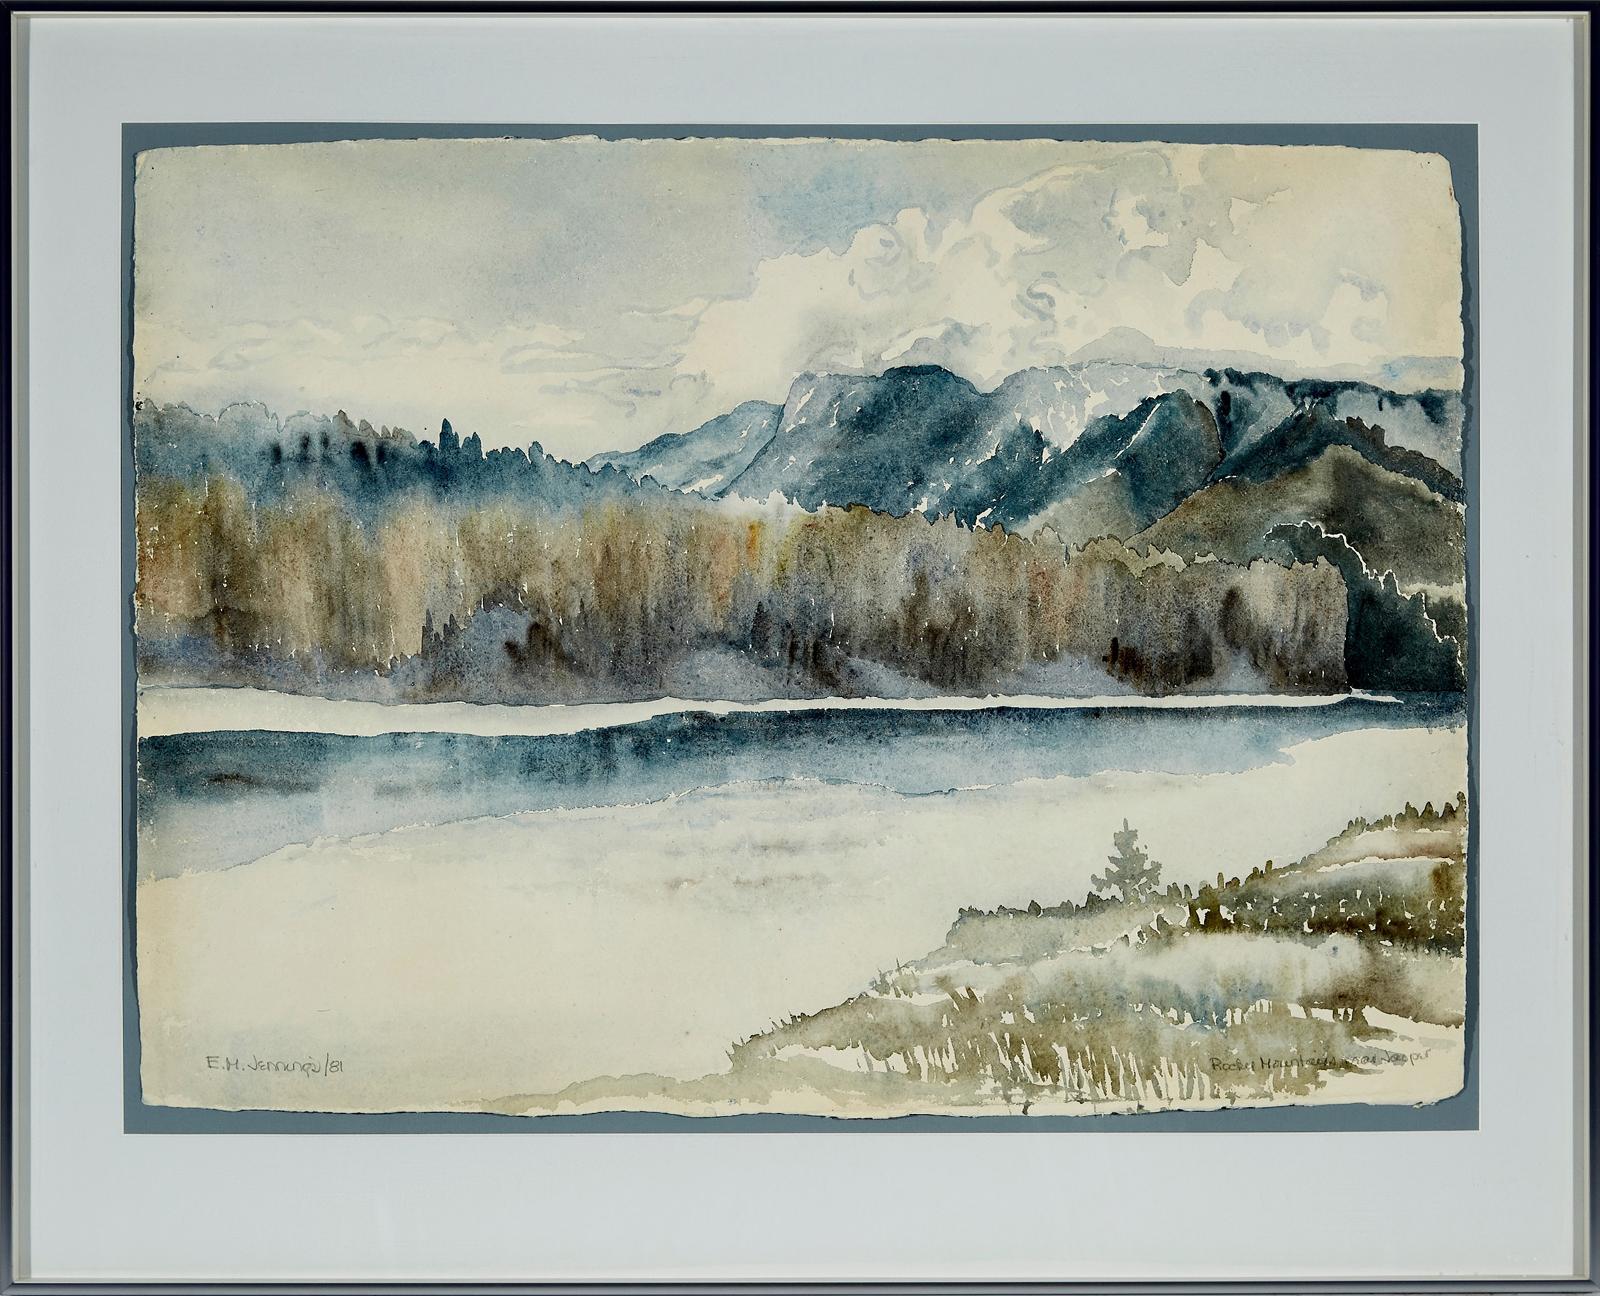 E.M. Jennings - Untitled (River And Mountains)